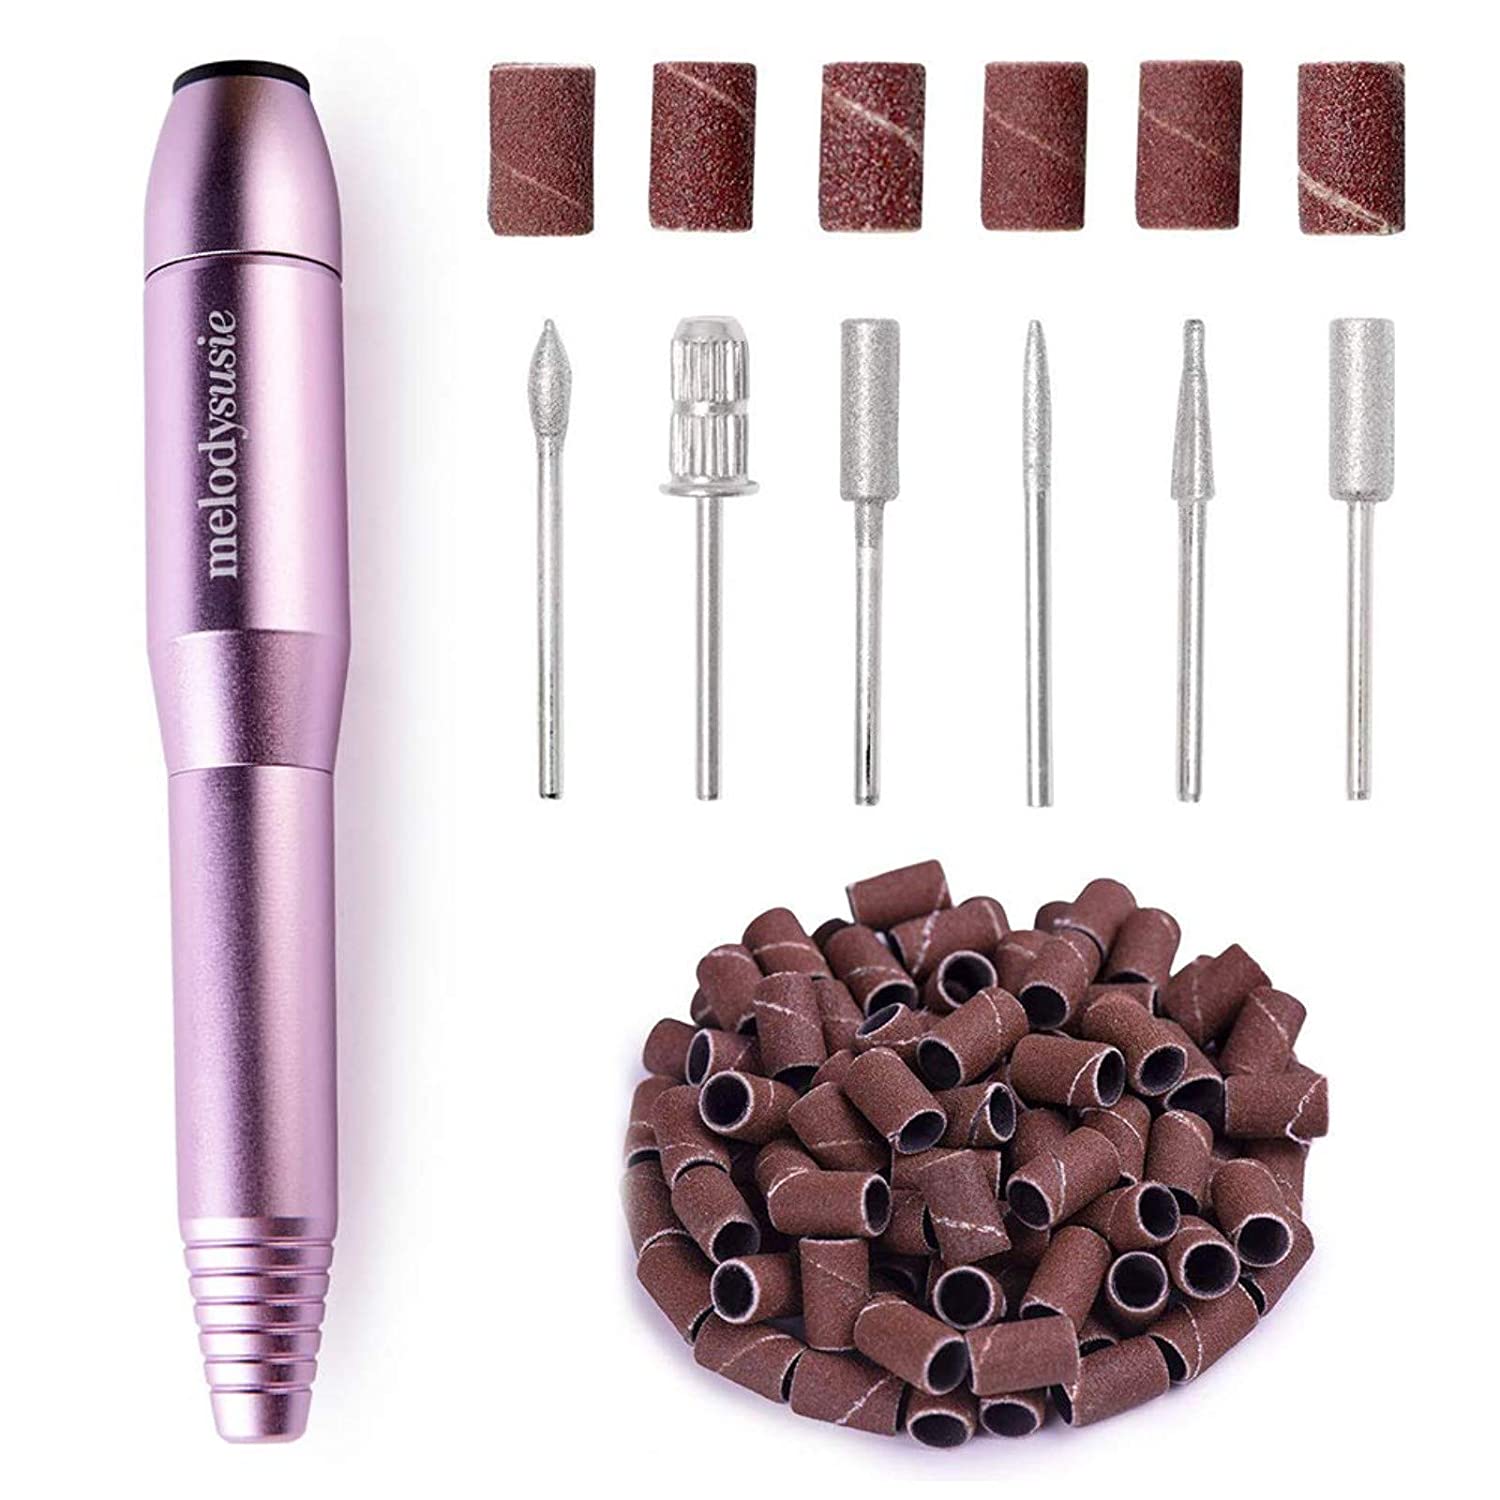 MelodySusie Adjustable Speed Nail Drill For Acrylic Nails